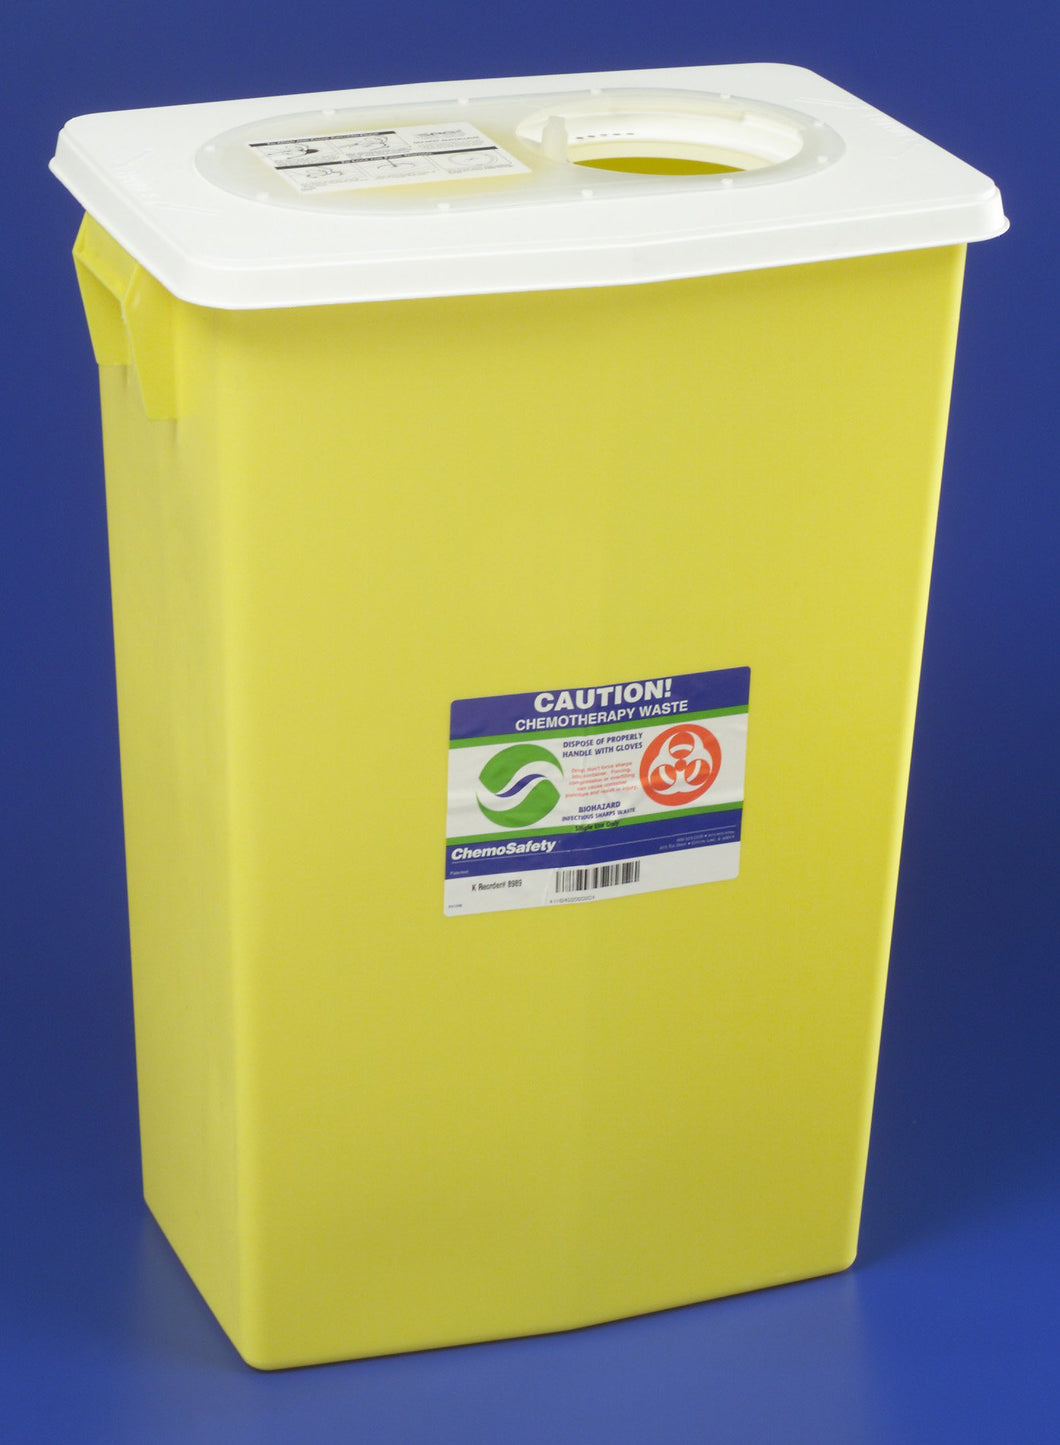 SharpSafety(TM) Chemotherapy Waste Container